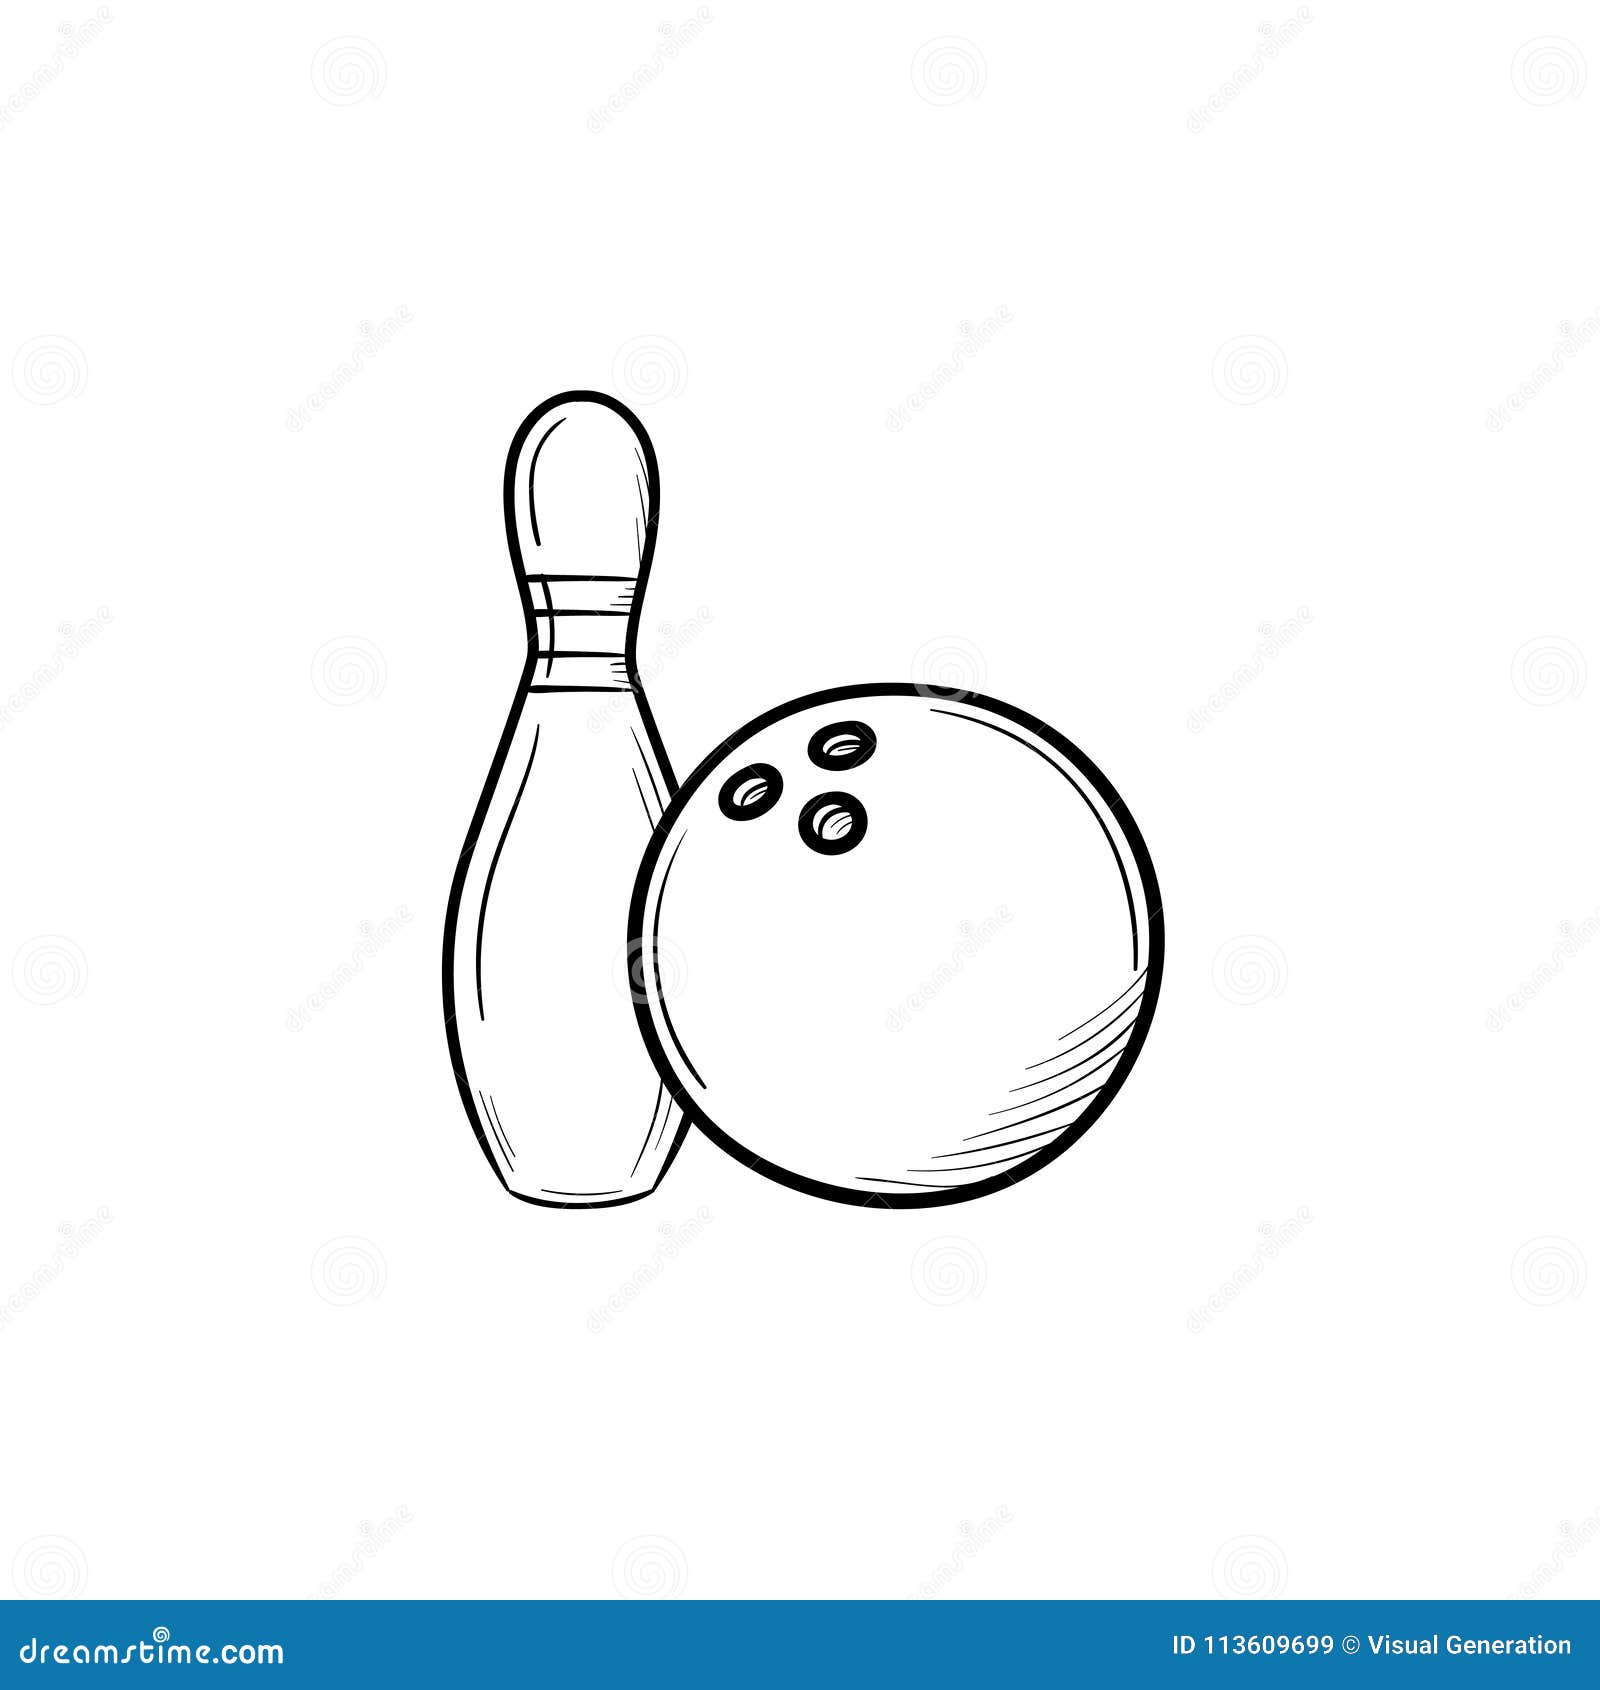 Bowling Hand Drawn Sketch Icon. Stock Vector - Illustration of isolated